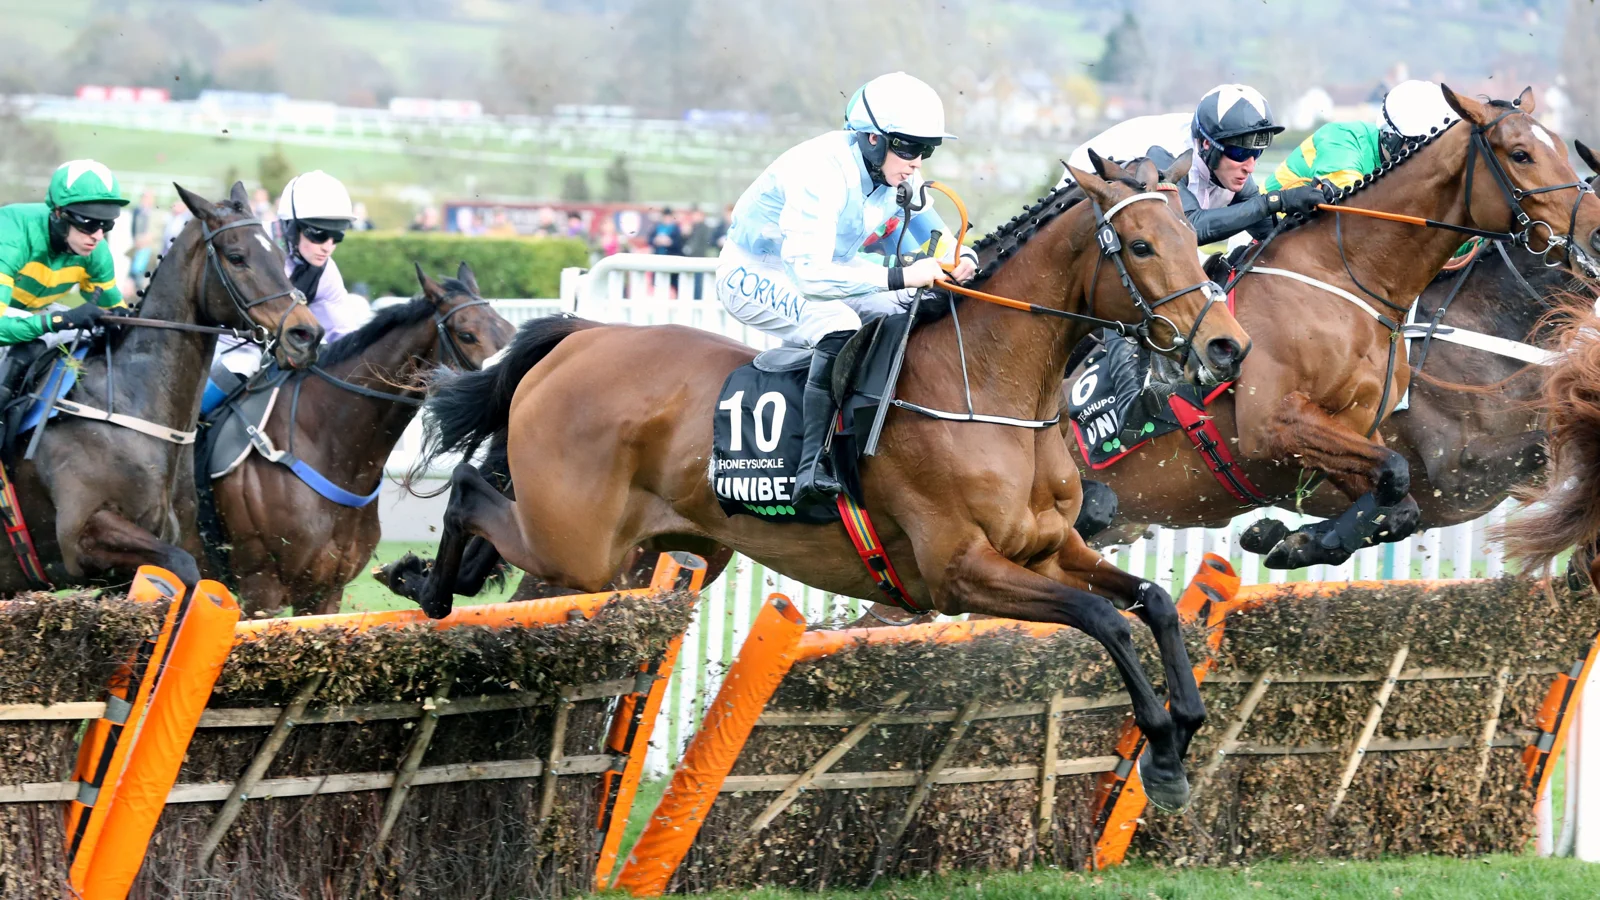 Hurdlers take on the new course at the iconic Cheltenham 